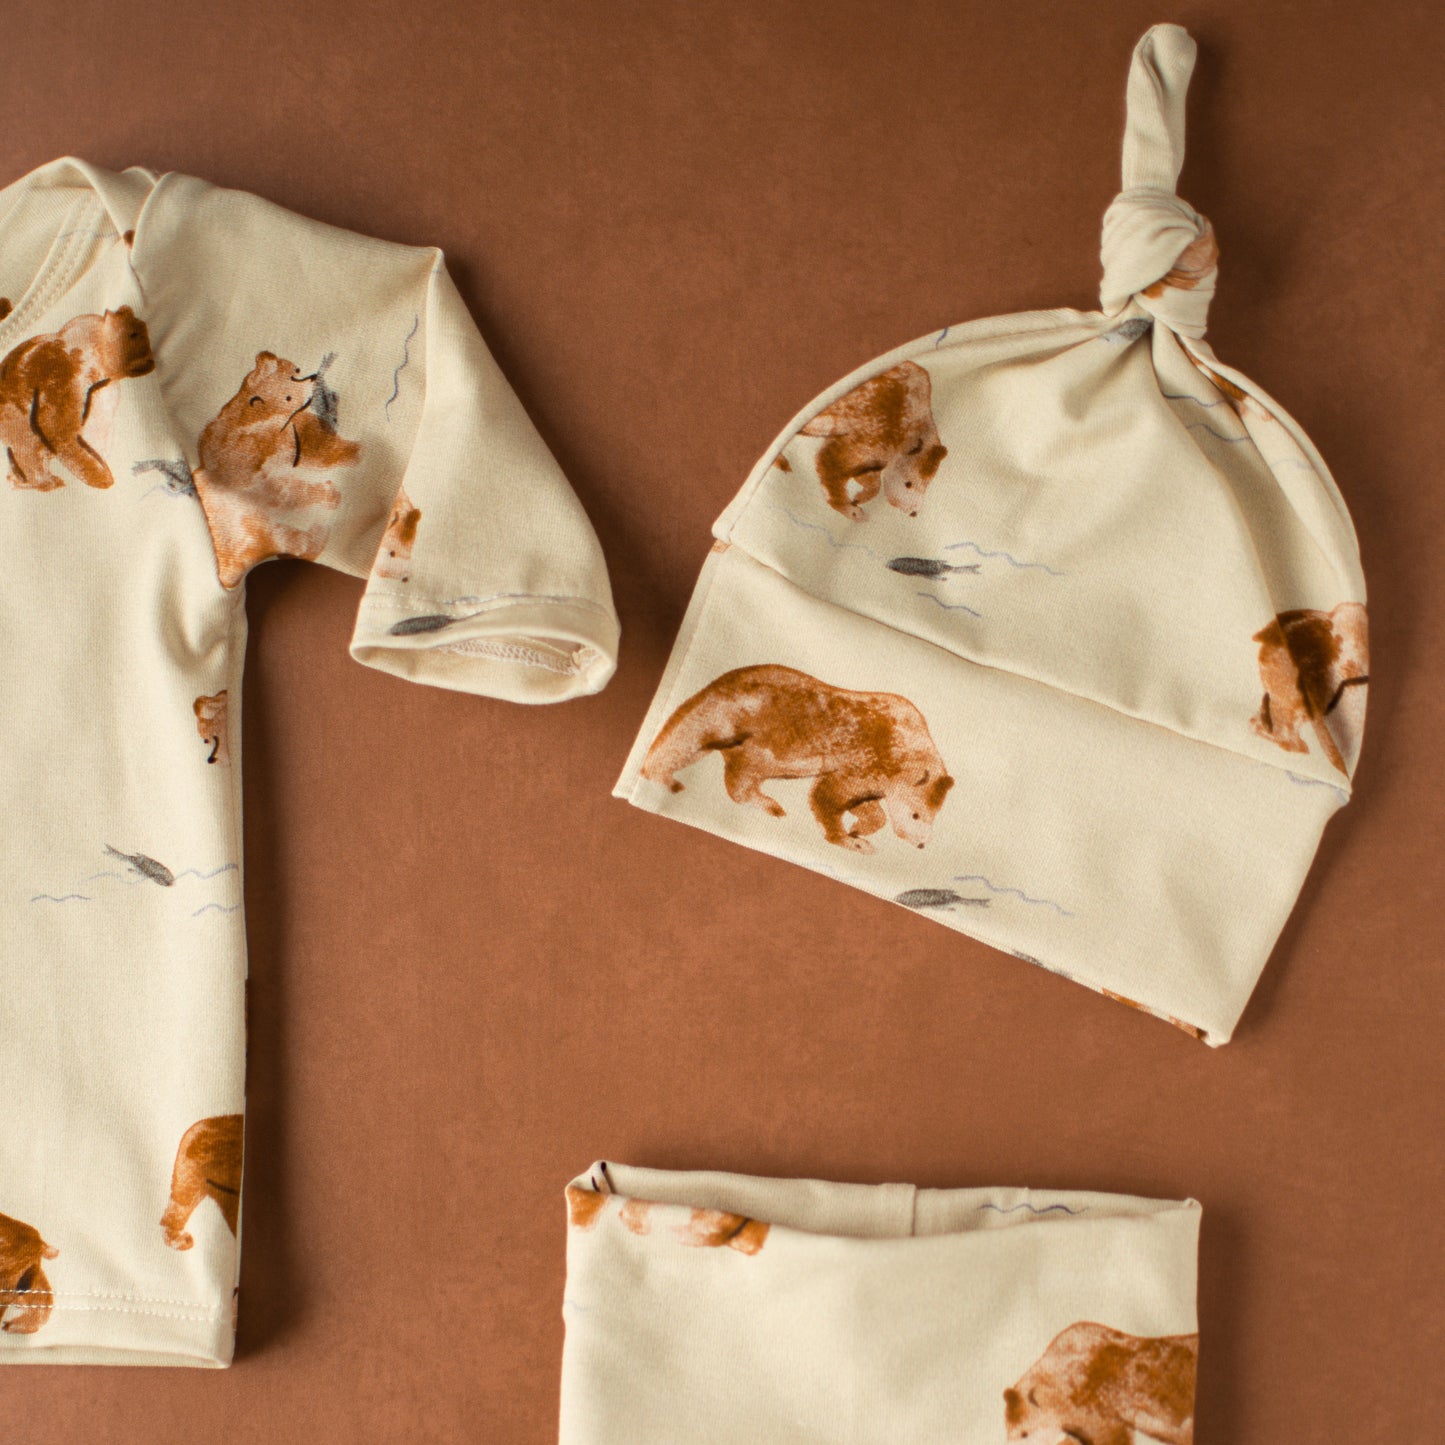 Grizzly Bear Baby Outfit Set Pants Shirt Hat and Mittens